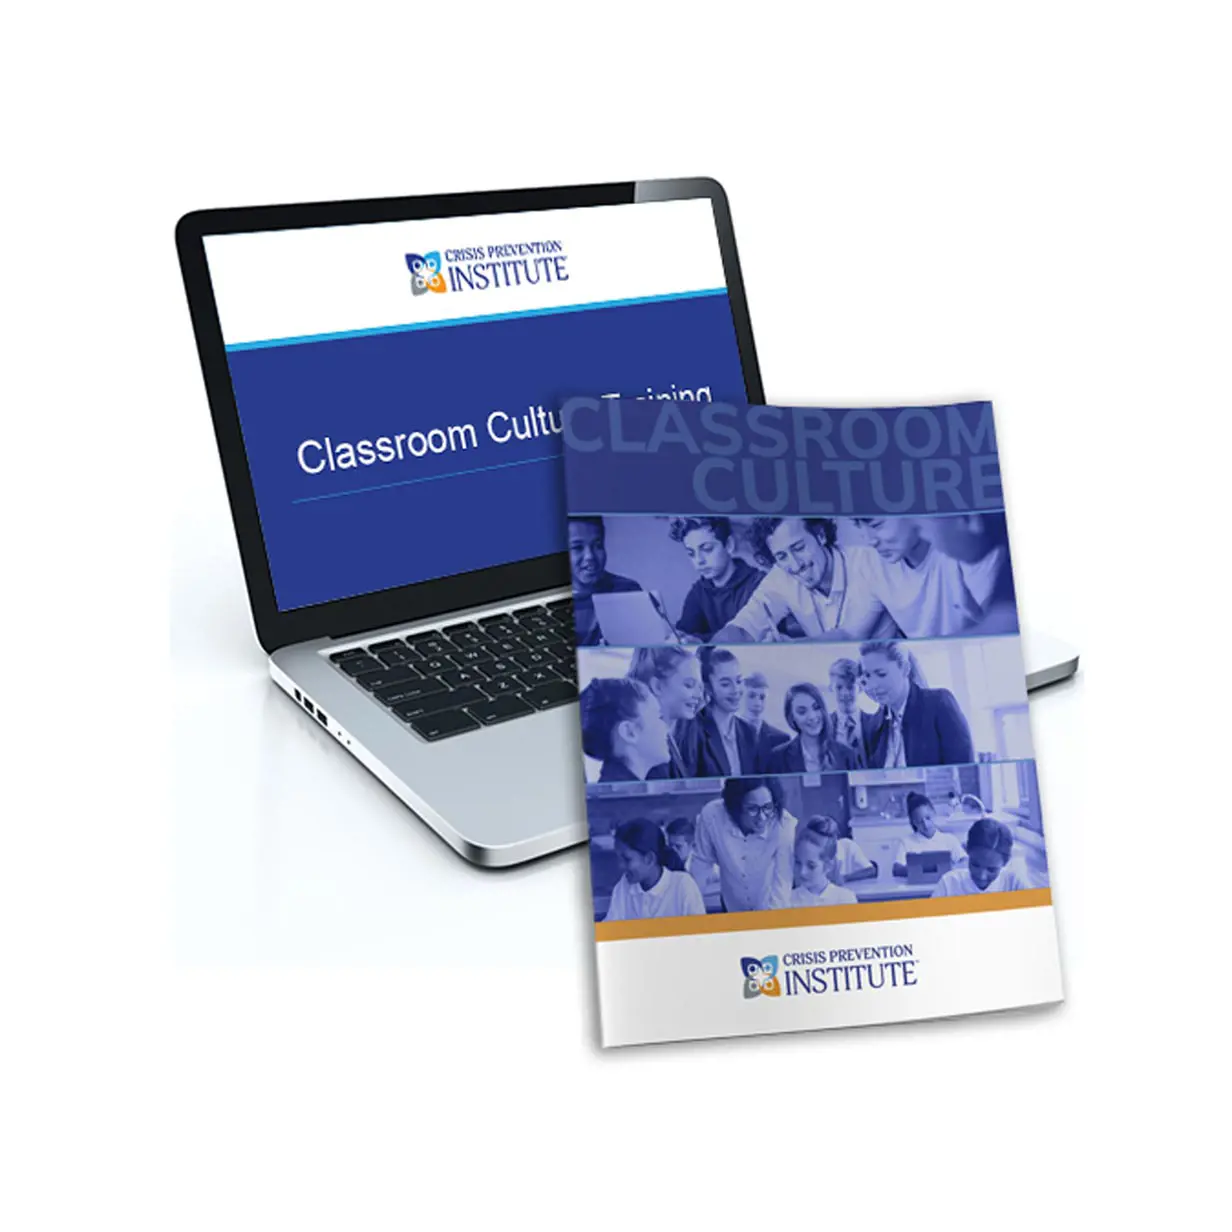 Laptop with Classroom Culture training and a workbook